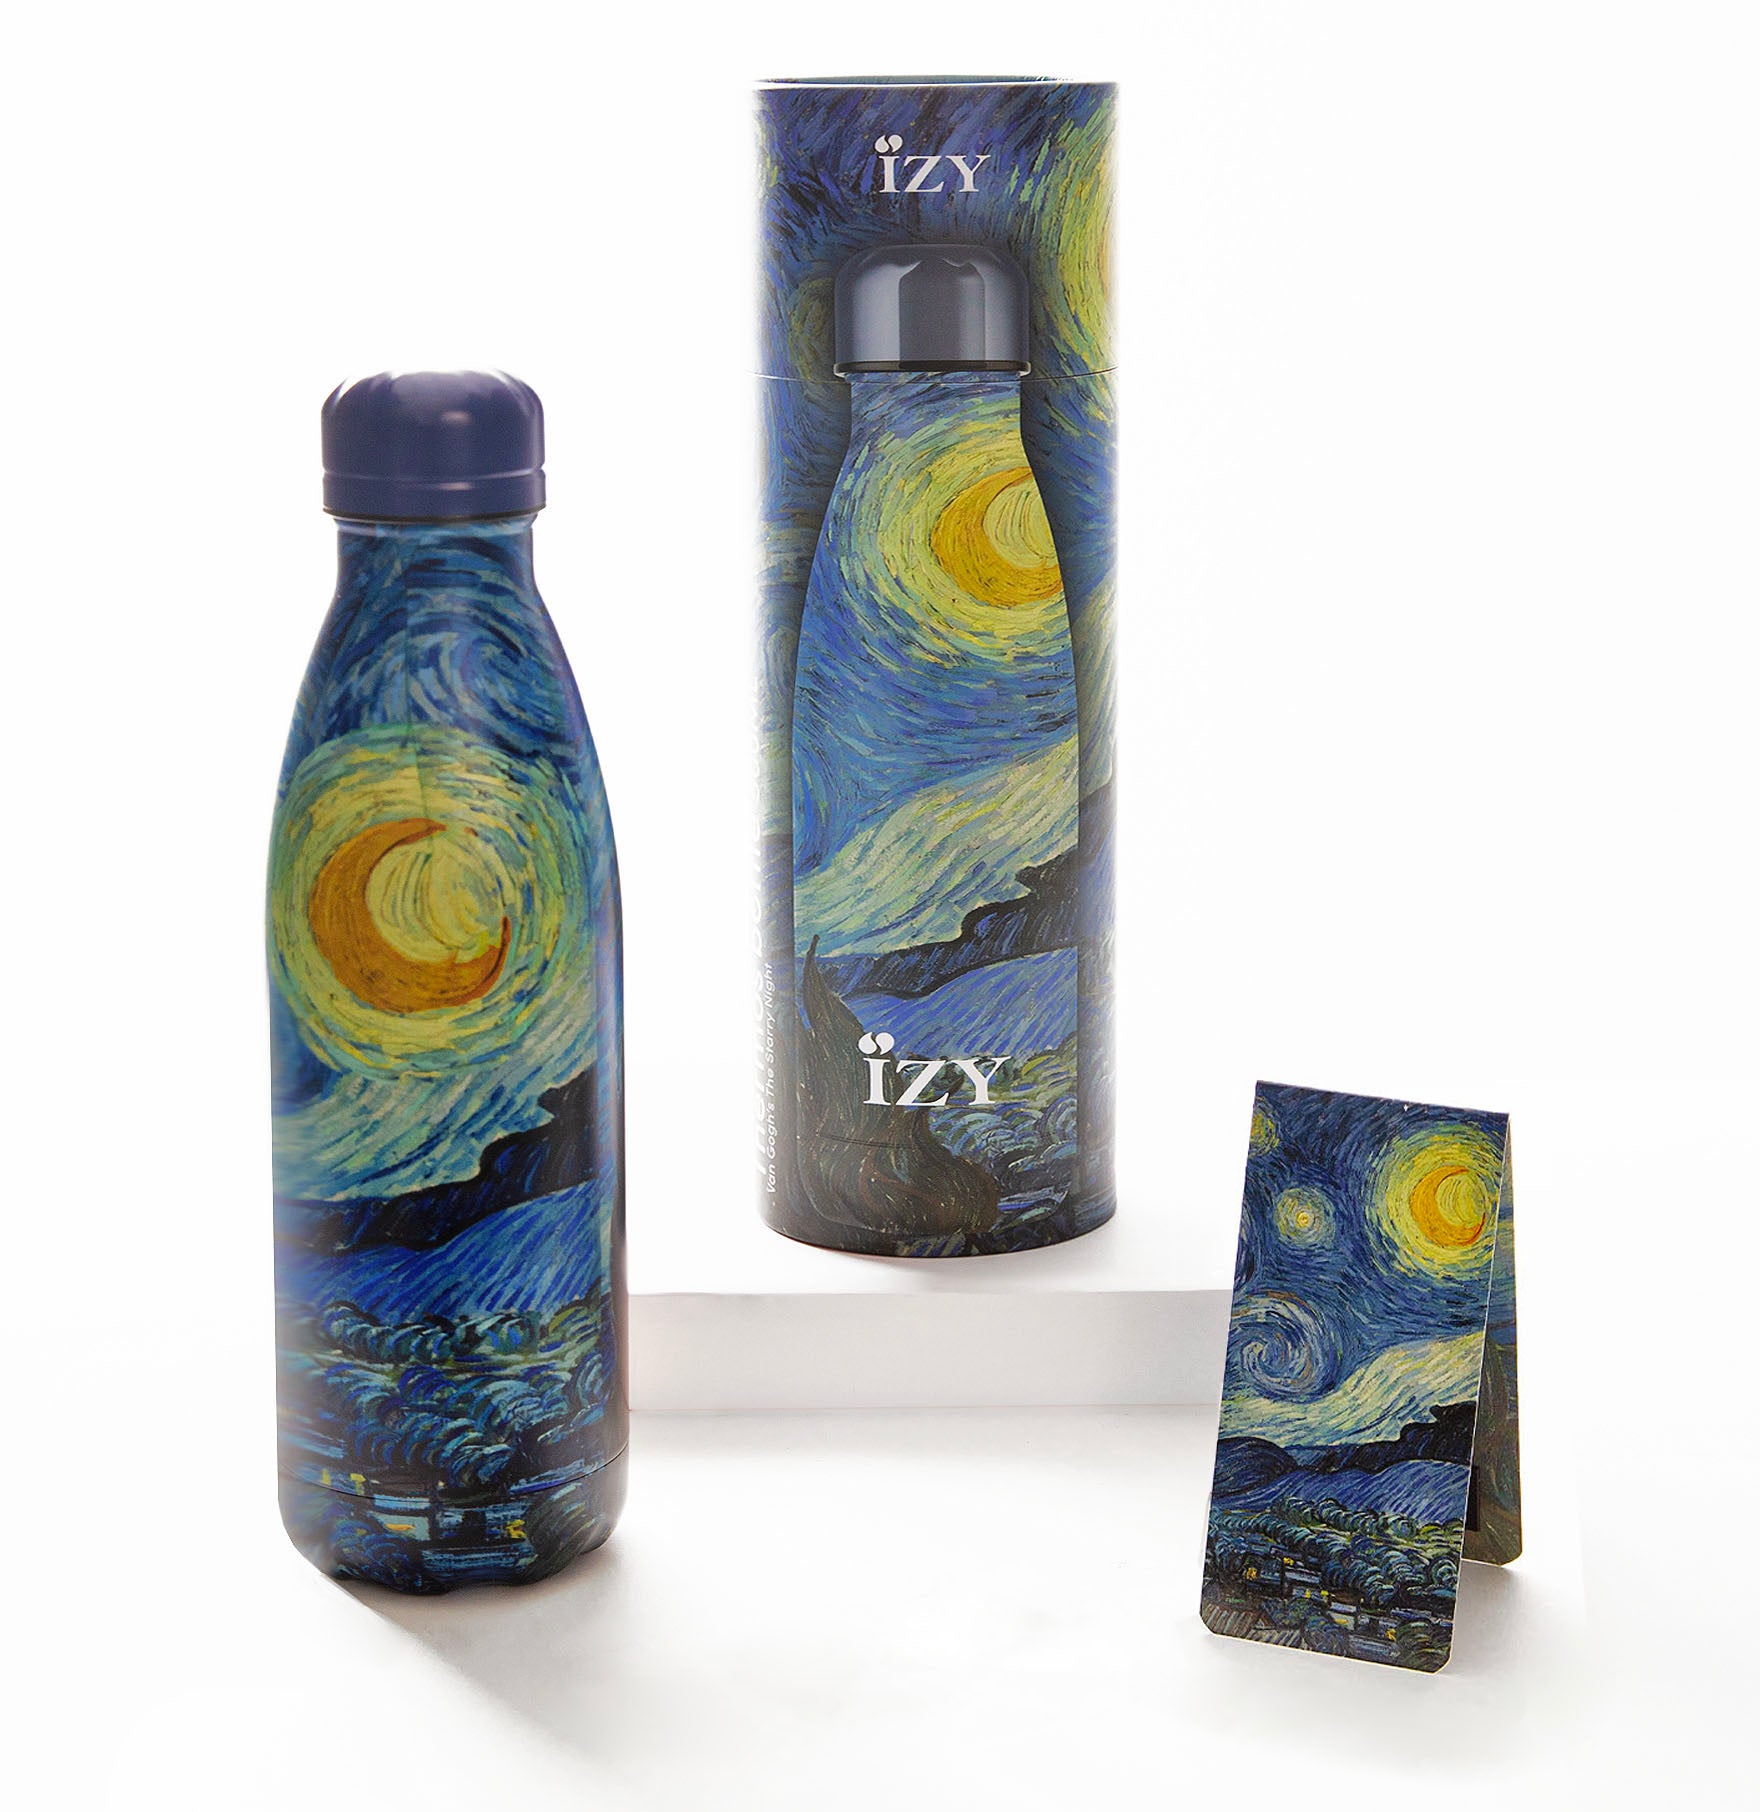 Shop Now! Holland's VAN GOGH 'Starry Night' Museum Souvenir Thermo Bottle Gift Set + Free Gift!